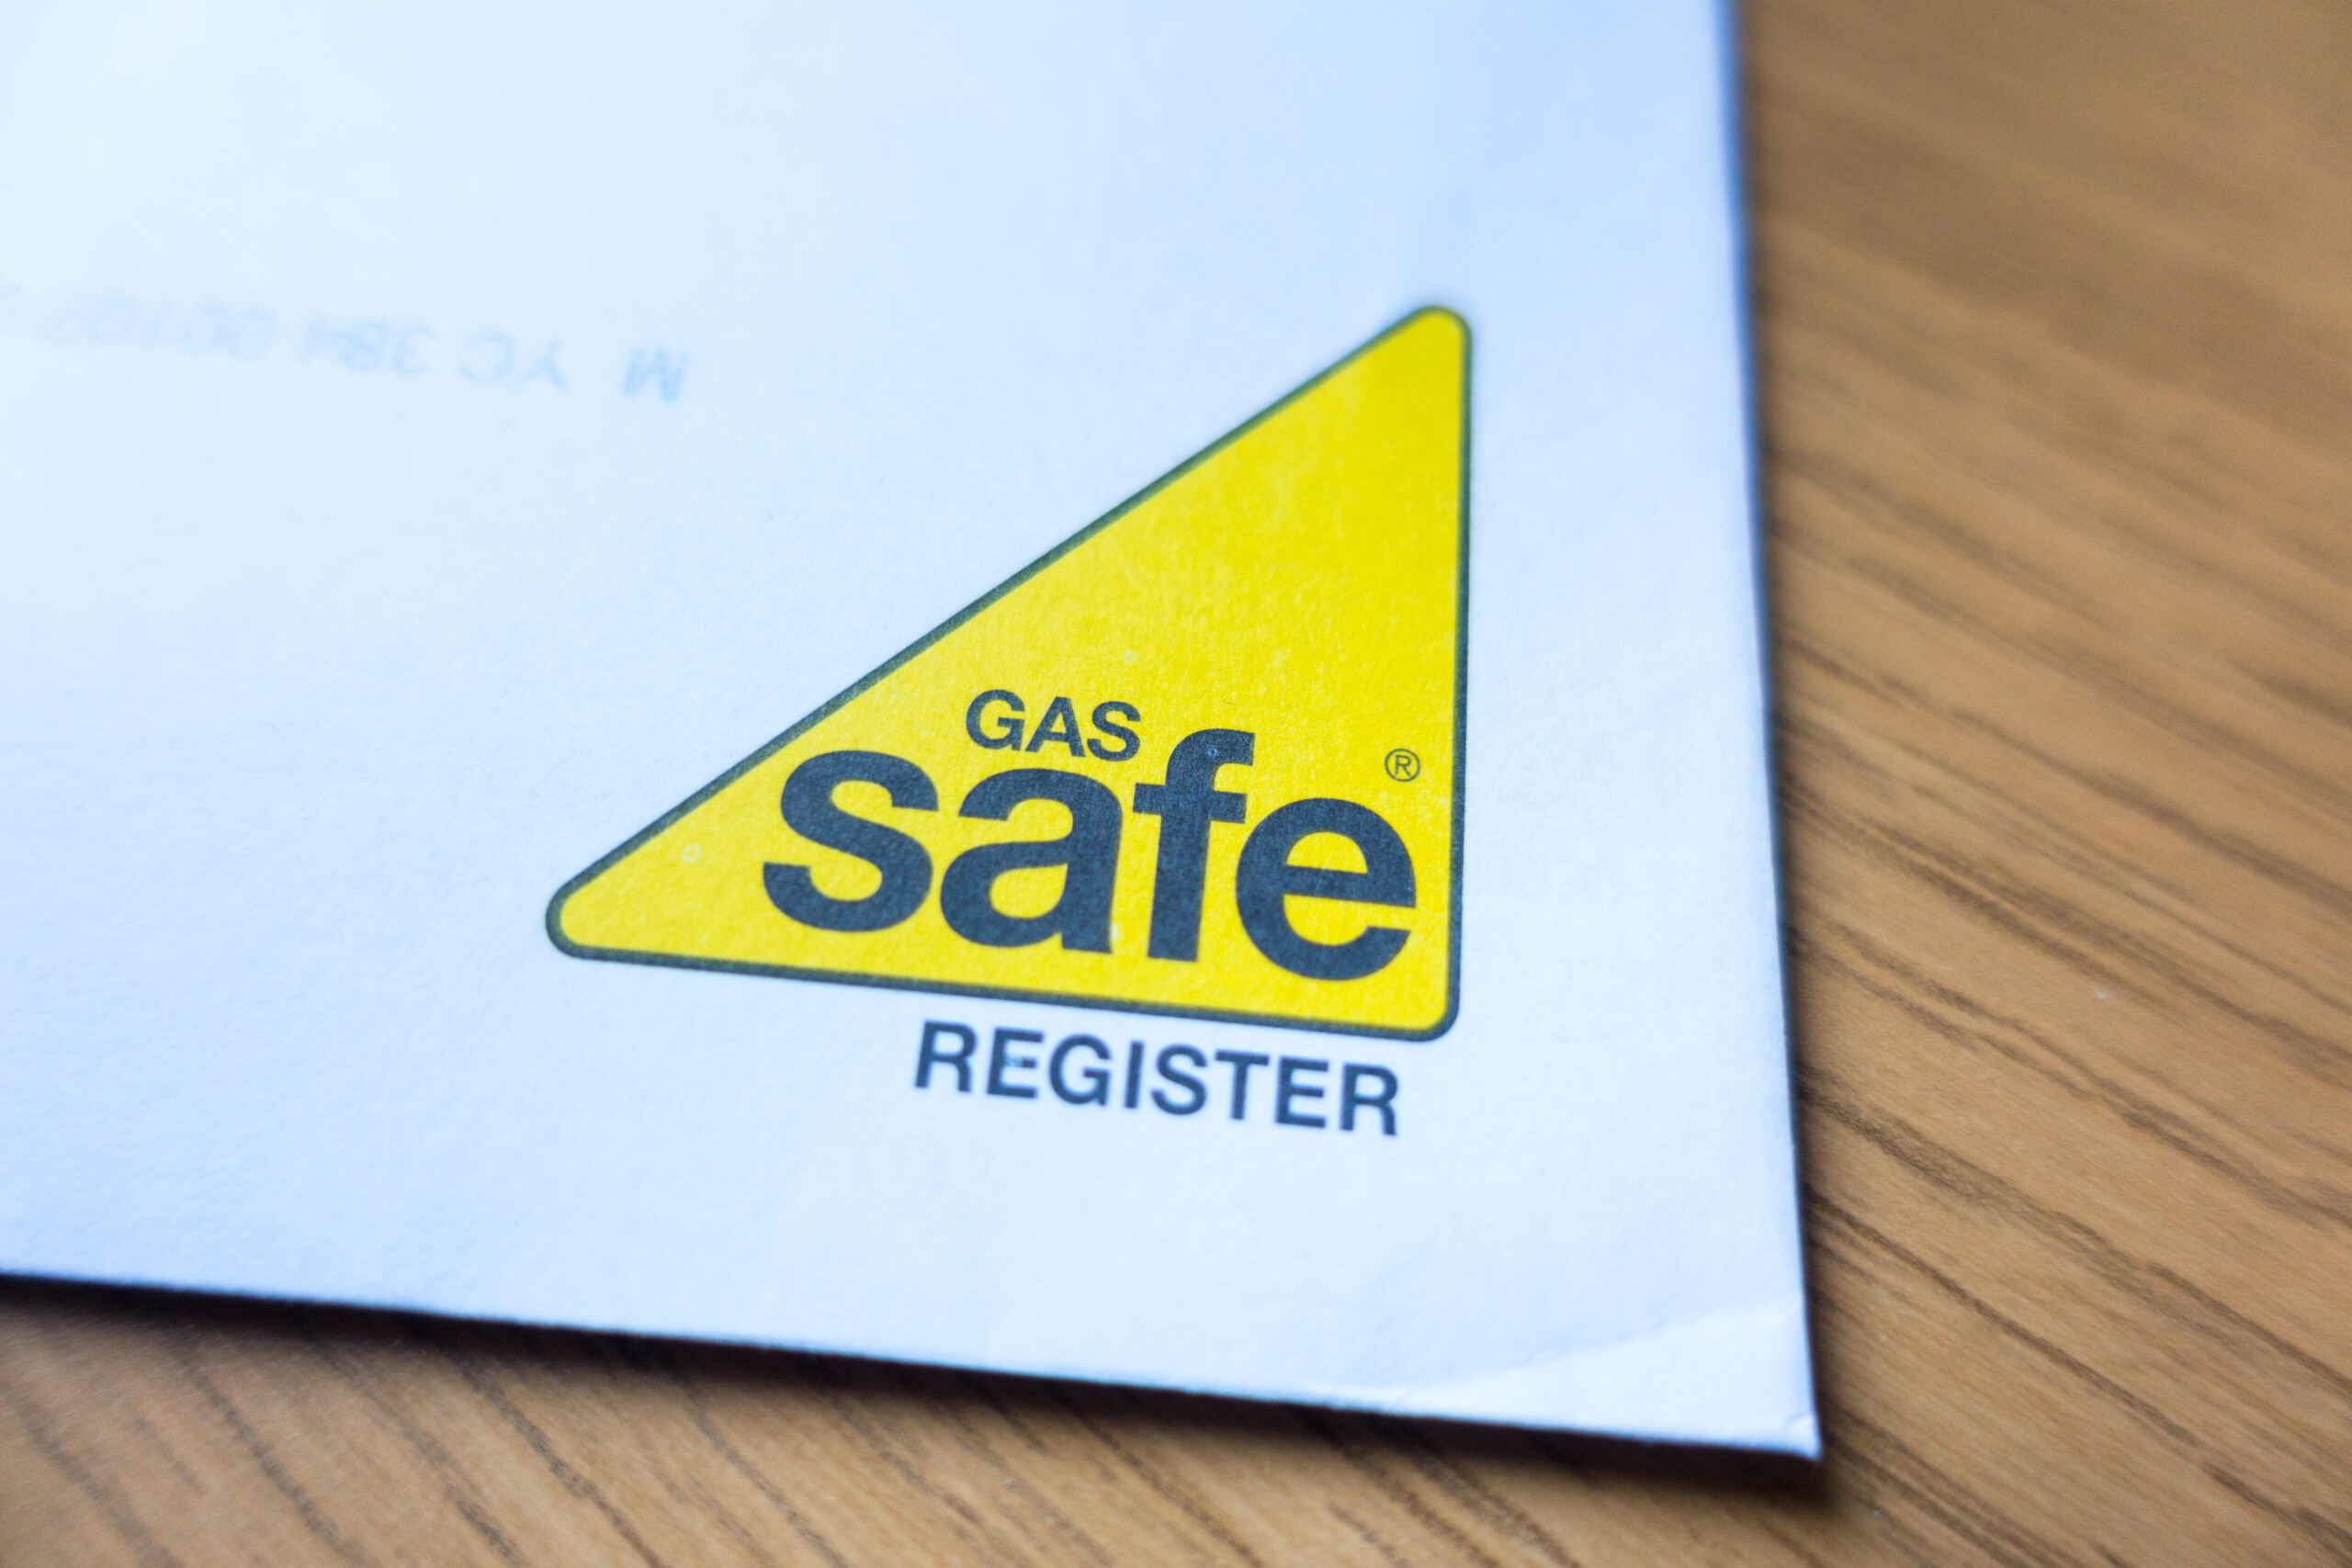 GAS Safe Register a regulatory body in the United Kingdom promoting responsible installation of Gas devices for Home and Commercial use